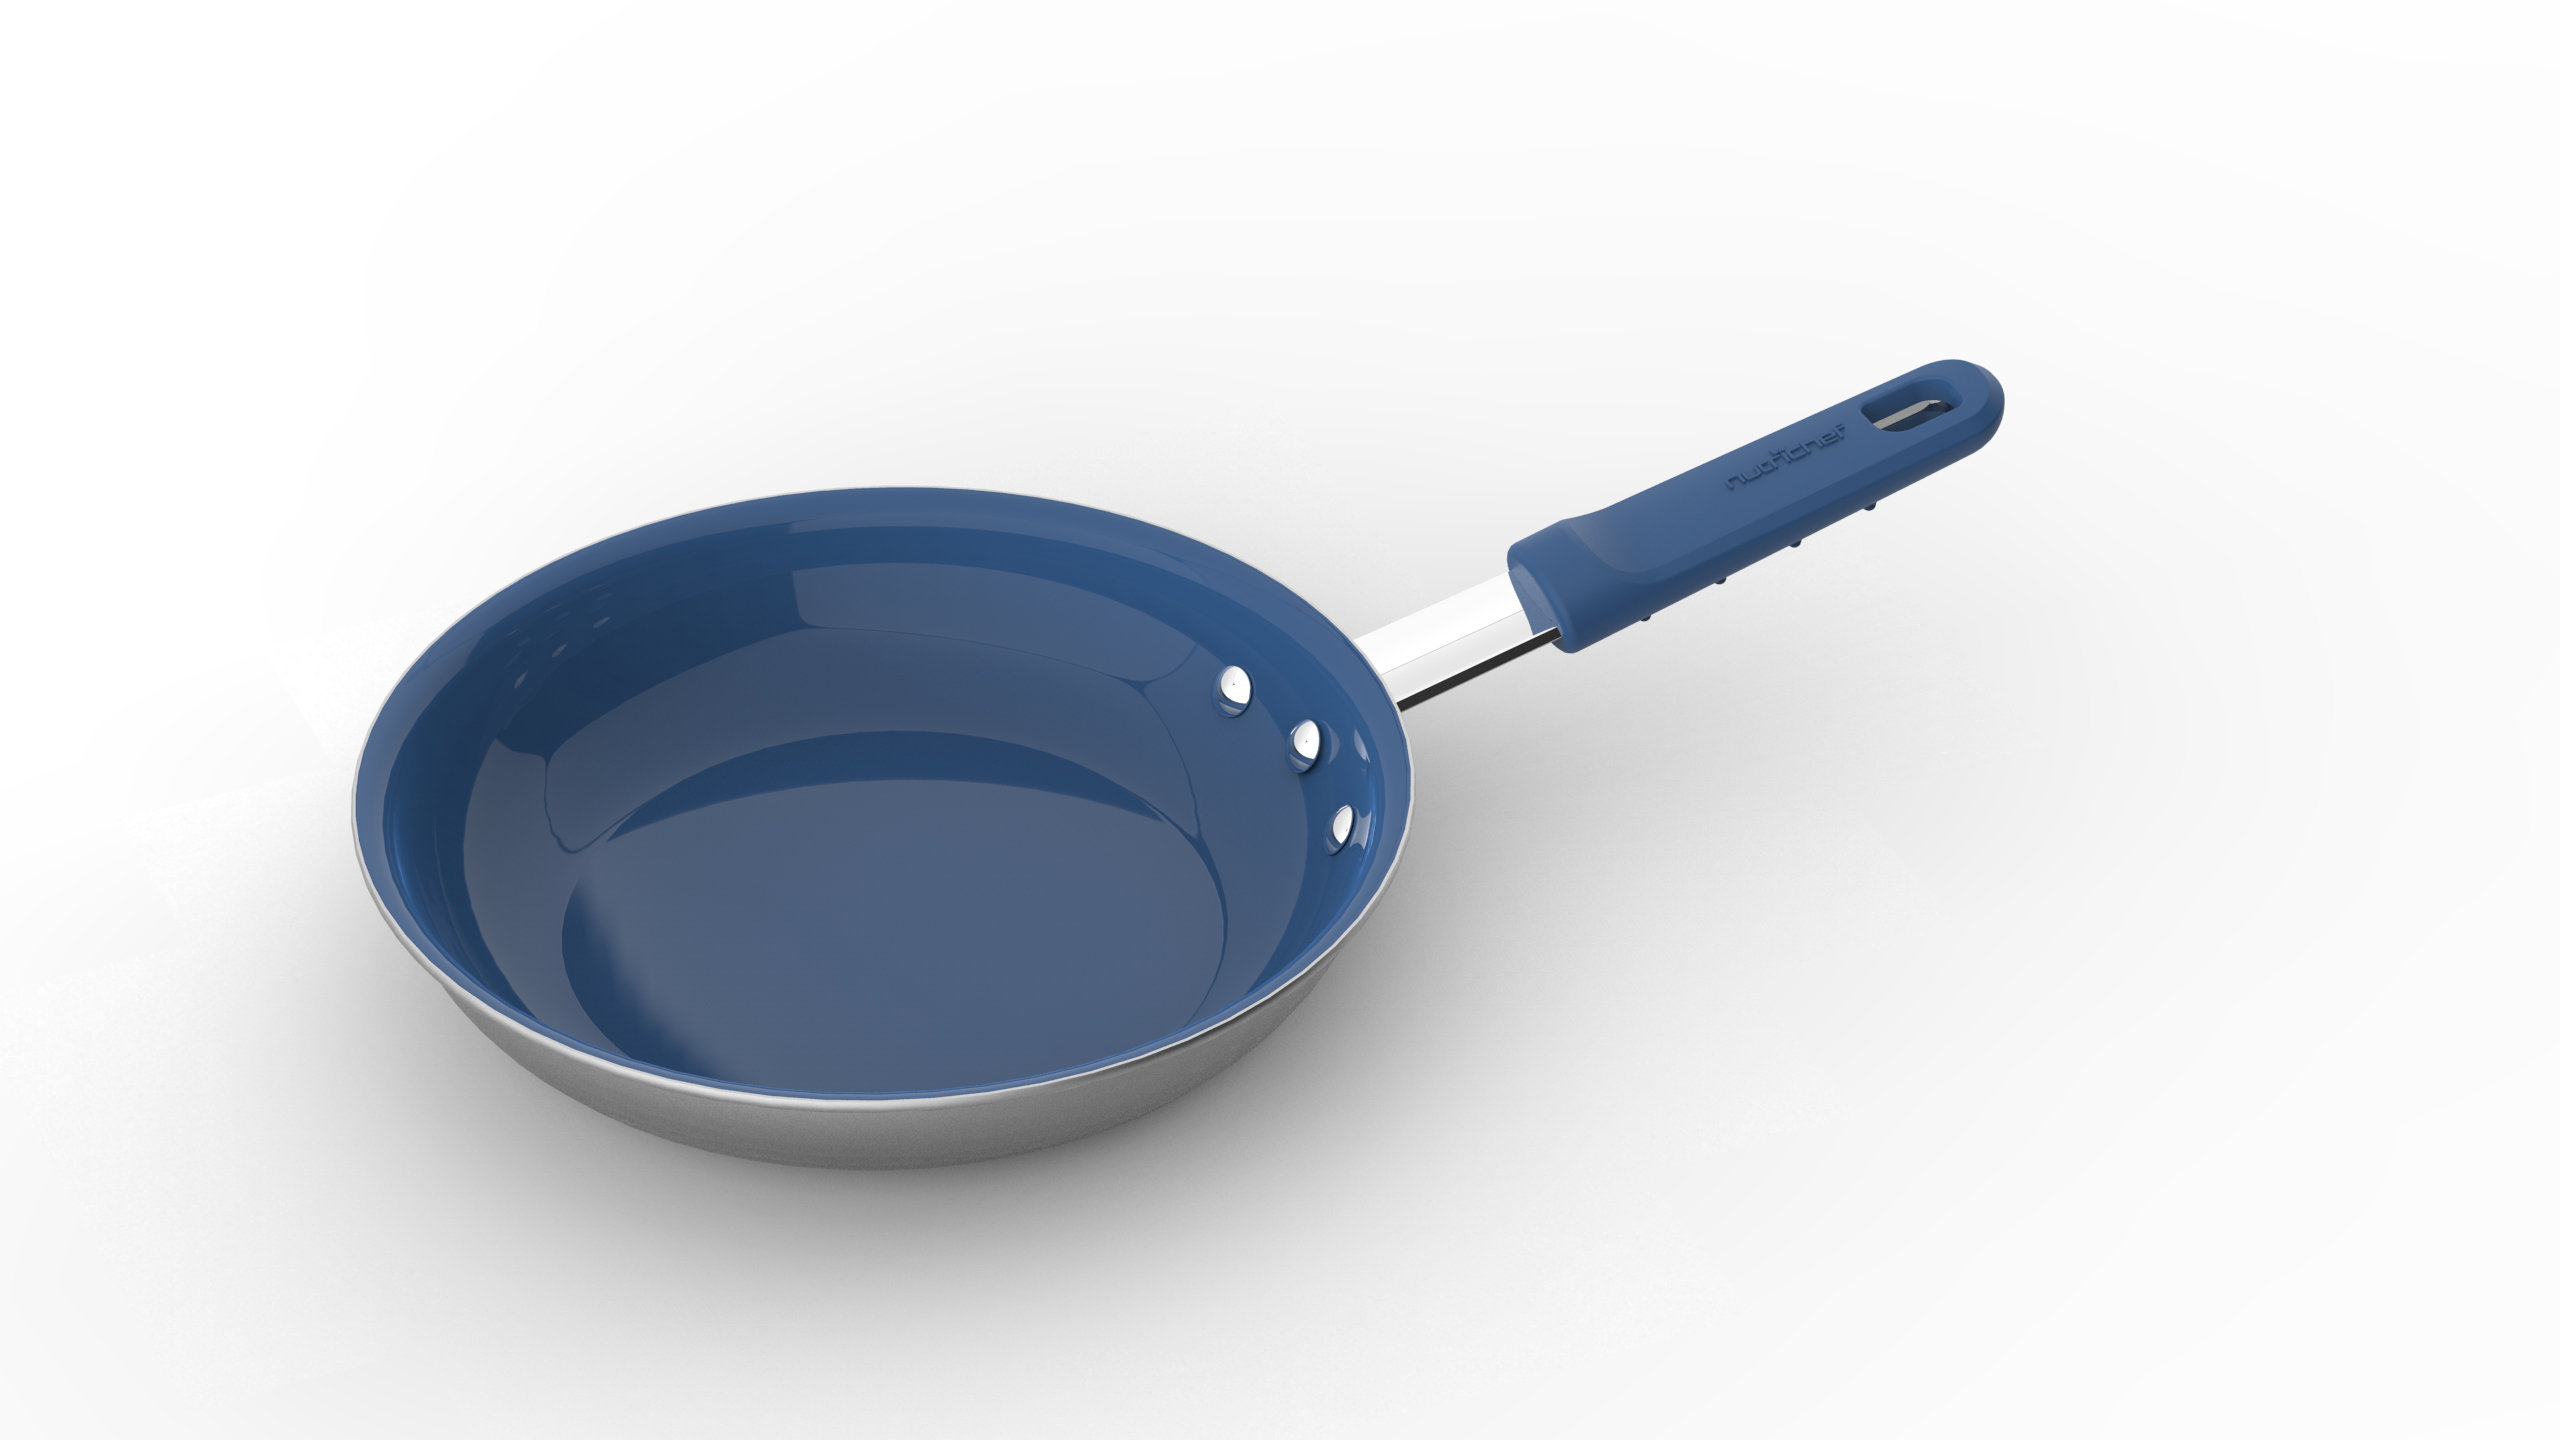 Nutrichef 8 Small Fry Pan - Small Skillet Nonstick Frying Pan with Silicone Handle, Ceramic Coating, Blue Silicone Handle